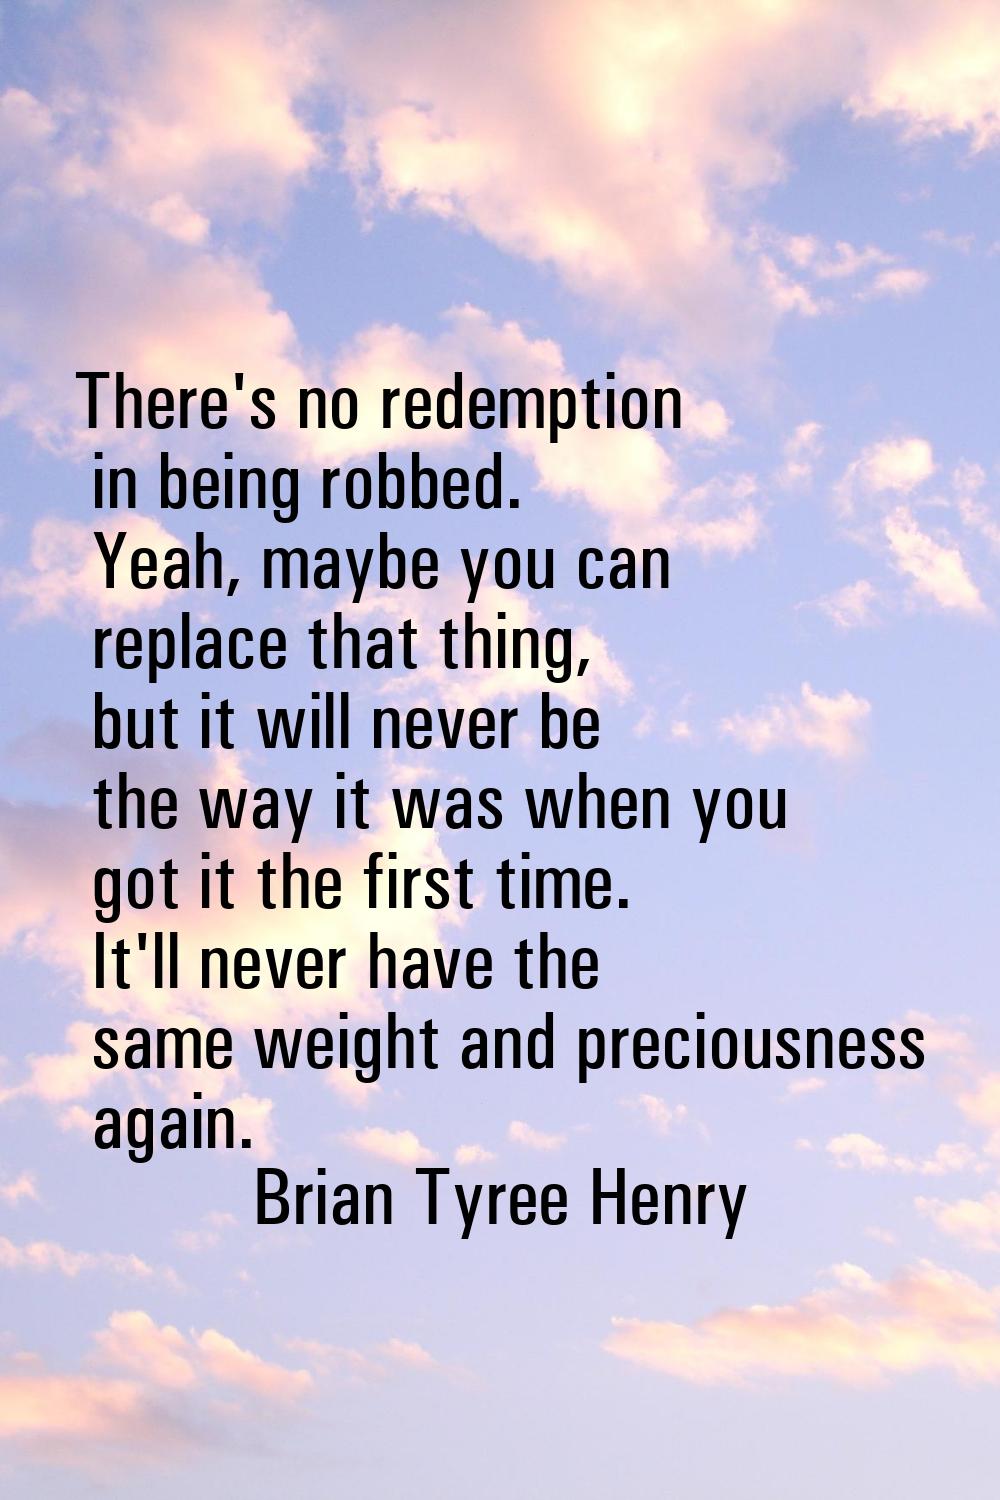 There's no redemption in being robbed. Yeah, maybe you can replace that thing, but it will never be